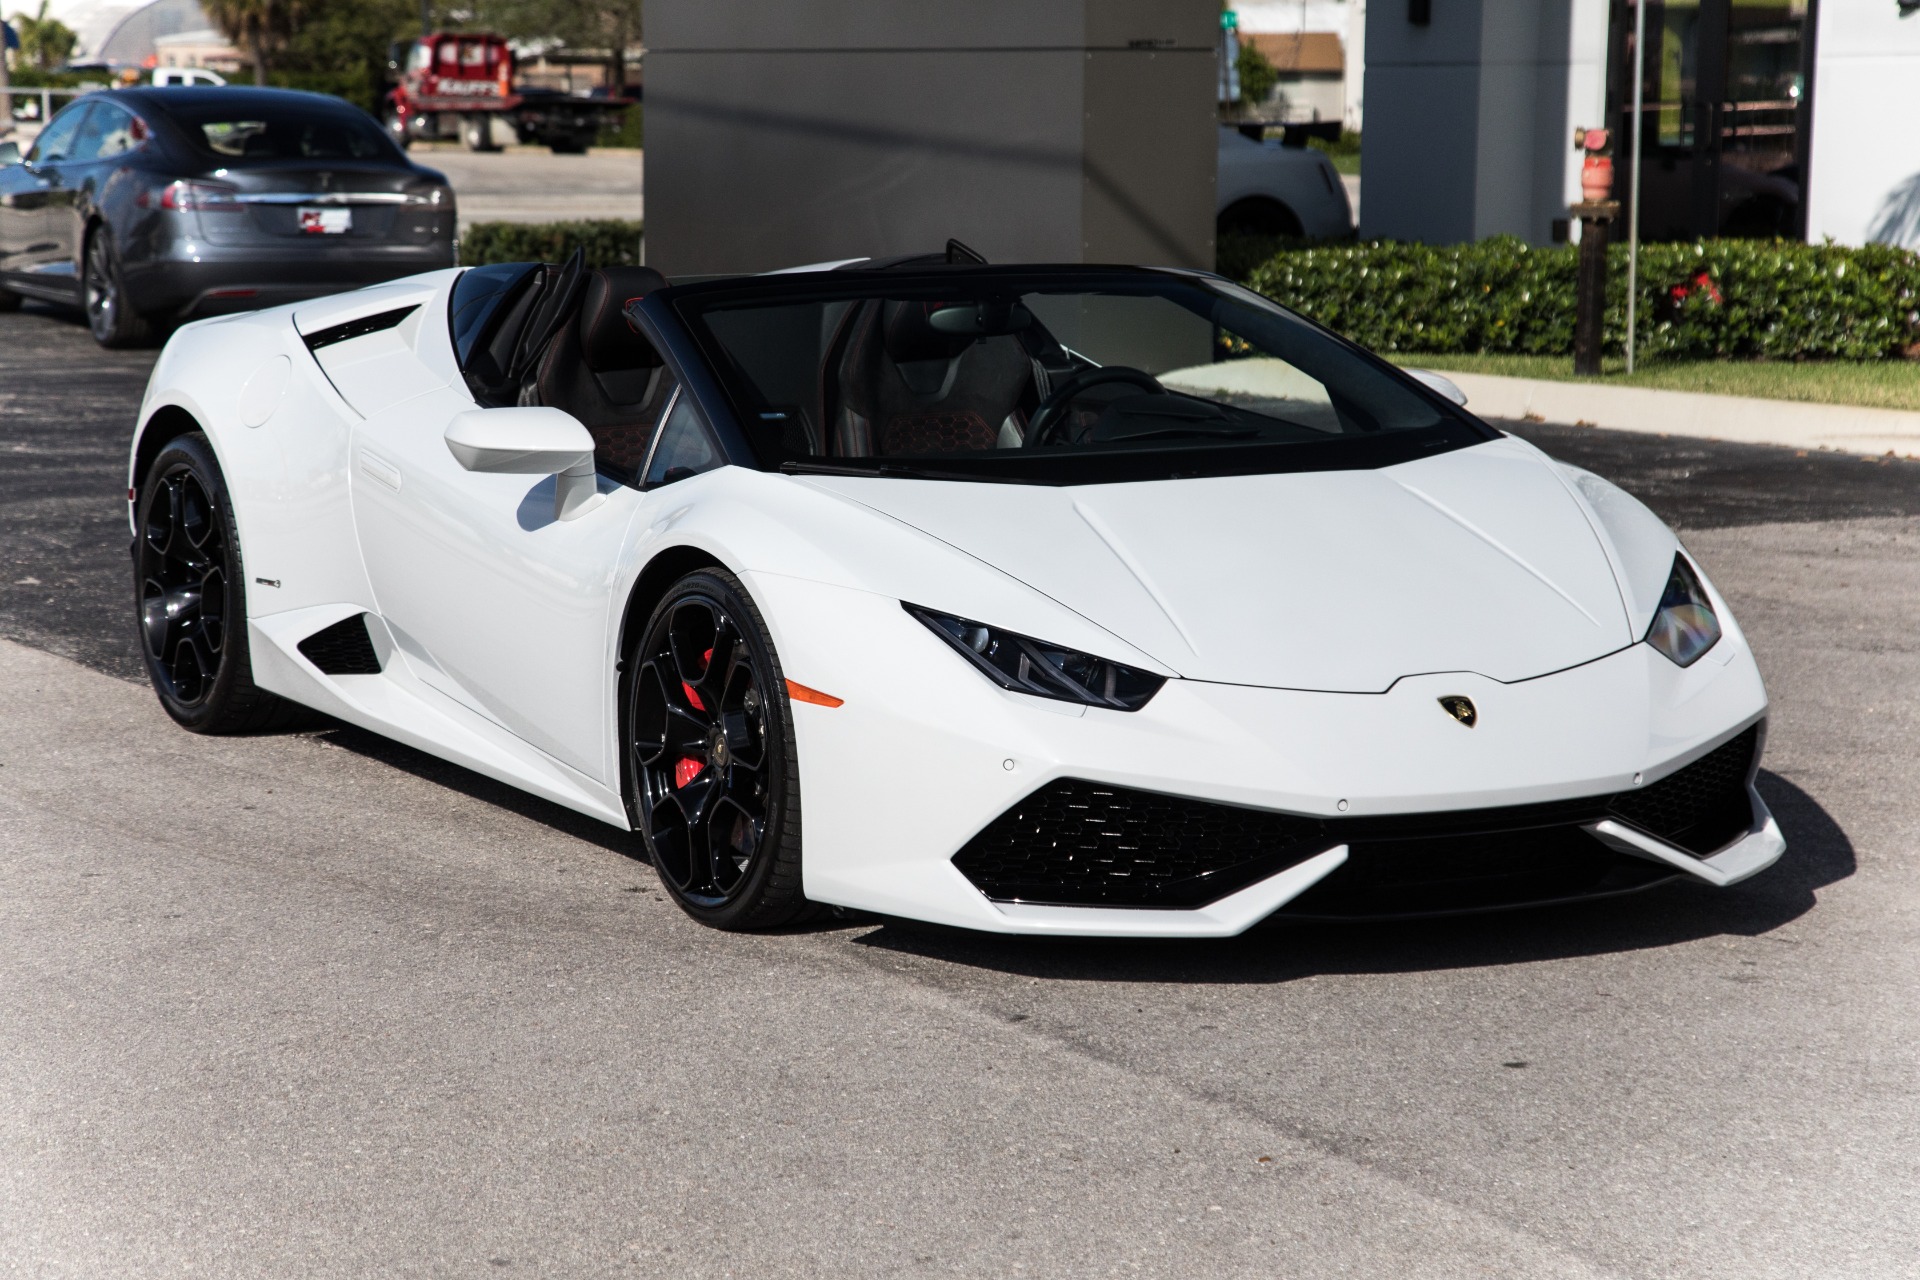 Lamborghini Huracan Lp 610-4 Spyder Price - How do you Price a Switches?